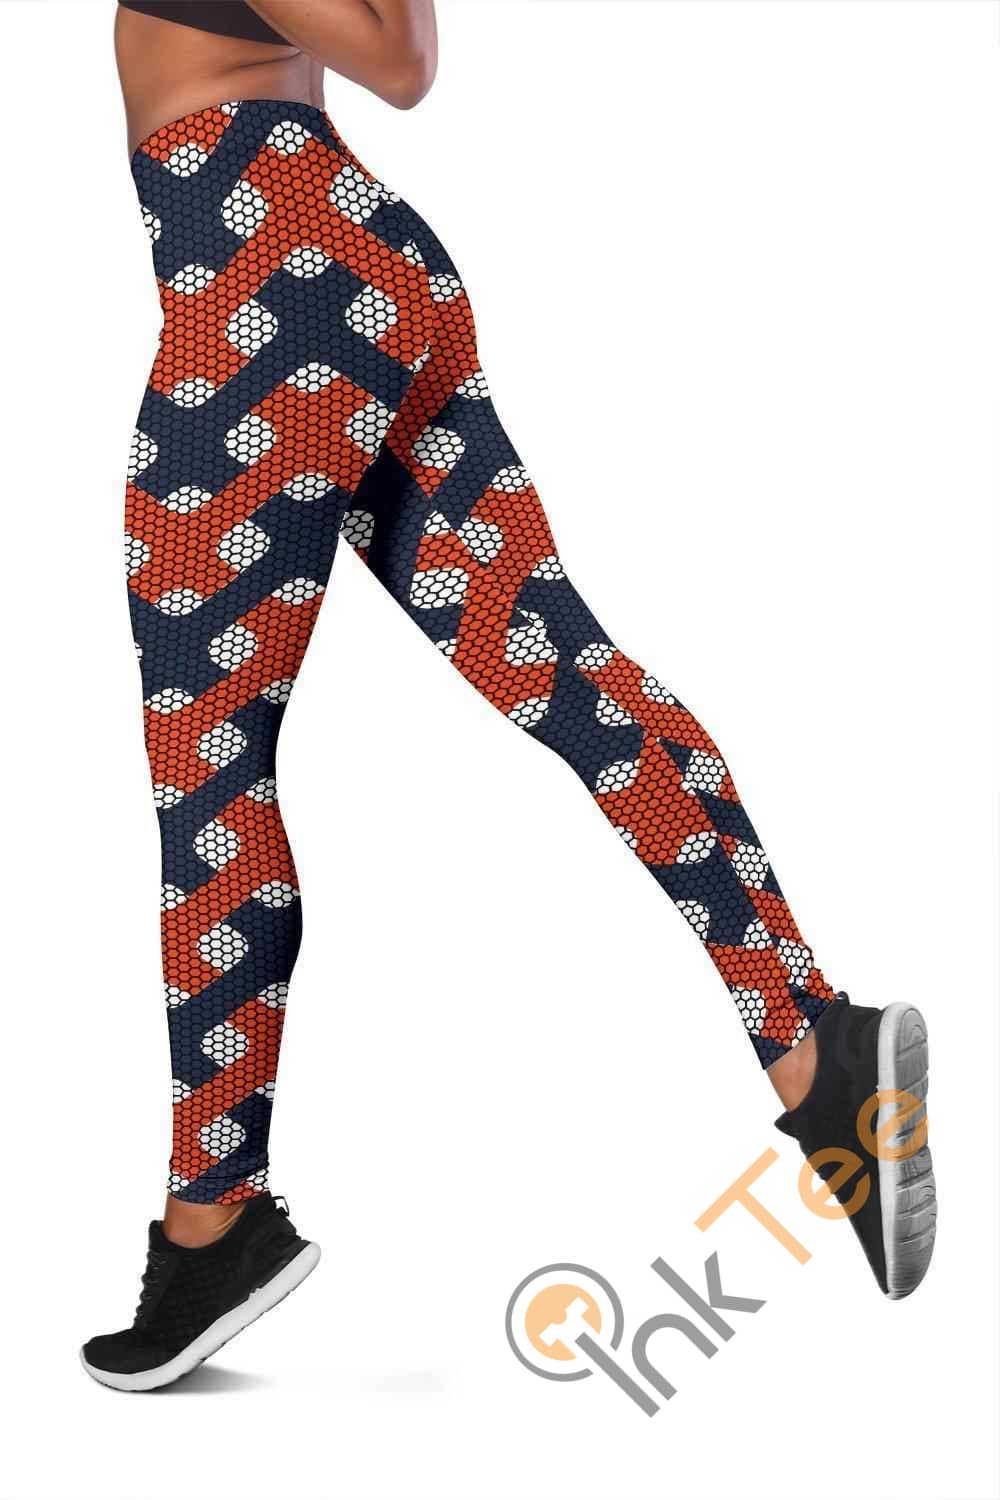 Inktee Store - Virginia Cavaliers Inspired Liberty 3D All Over Print For Yoga Fitness Fashion Women'S Leggings Image